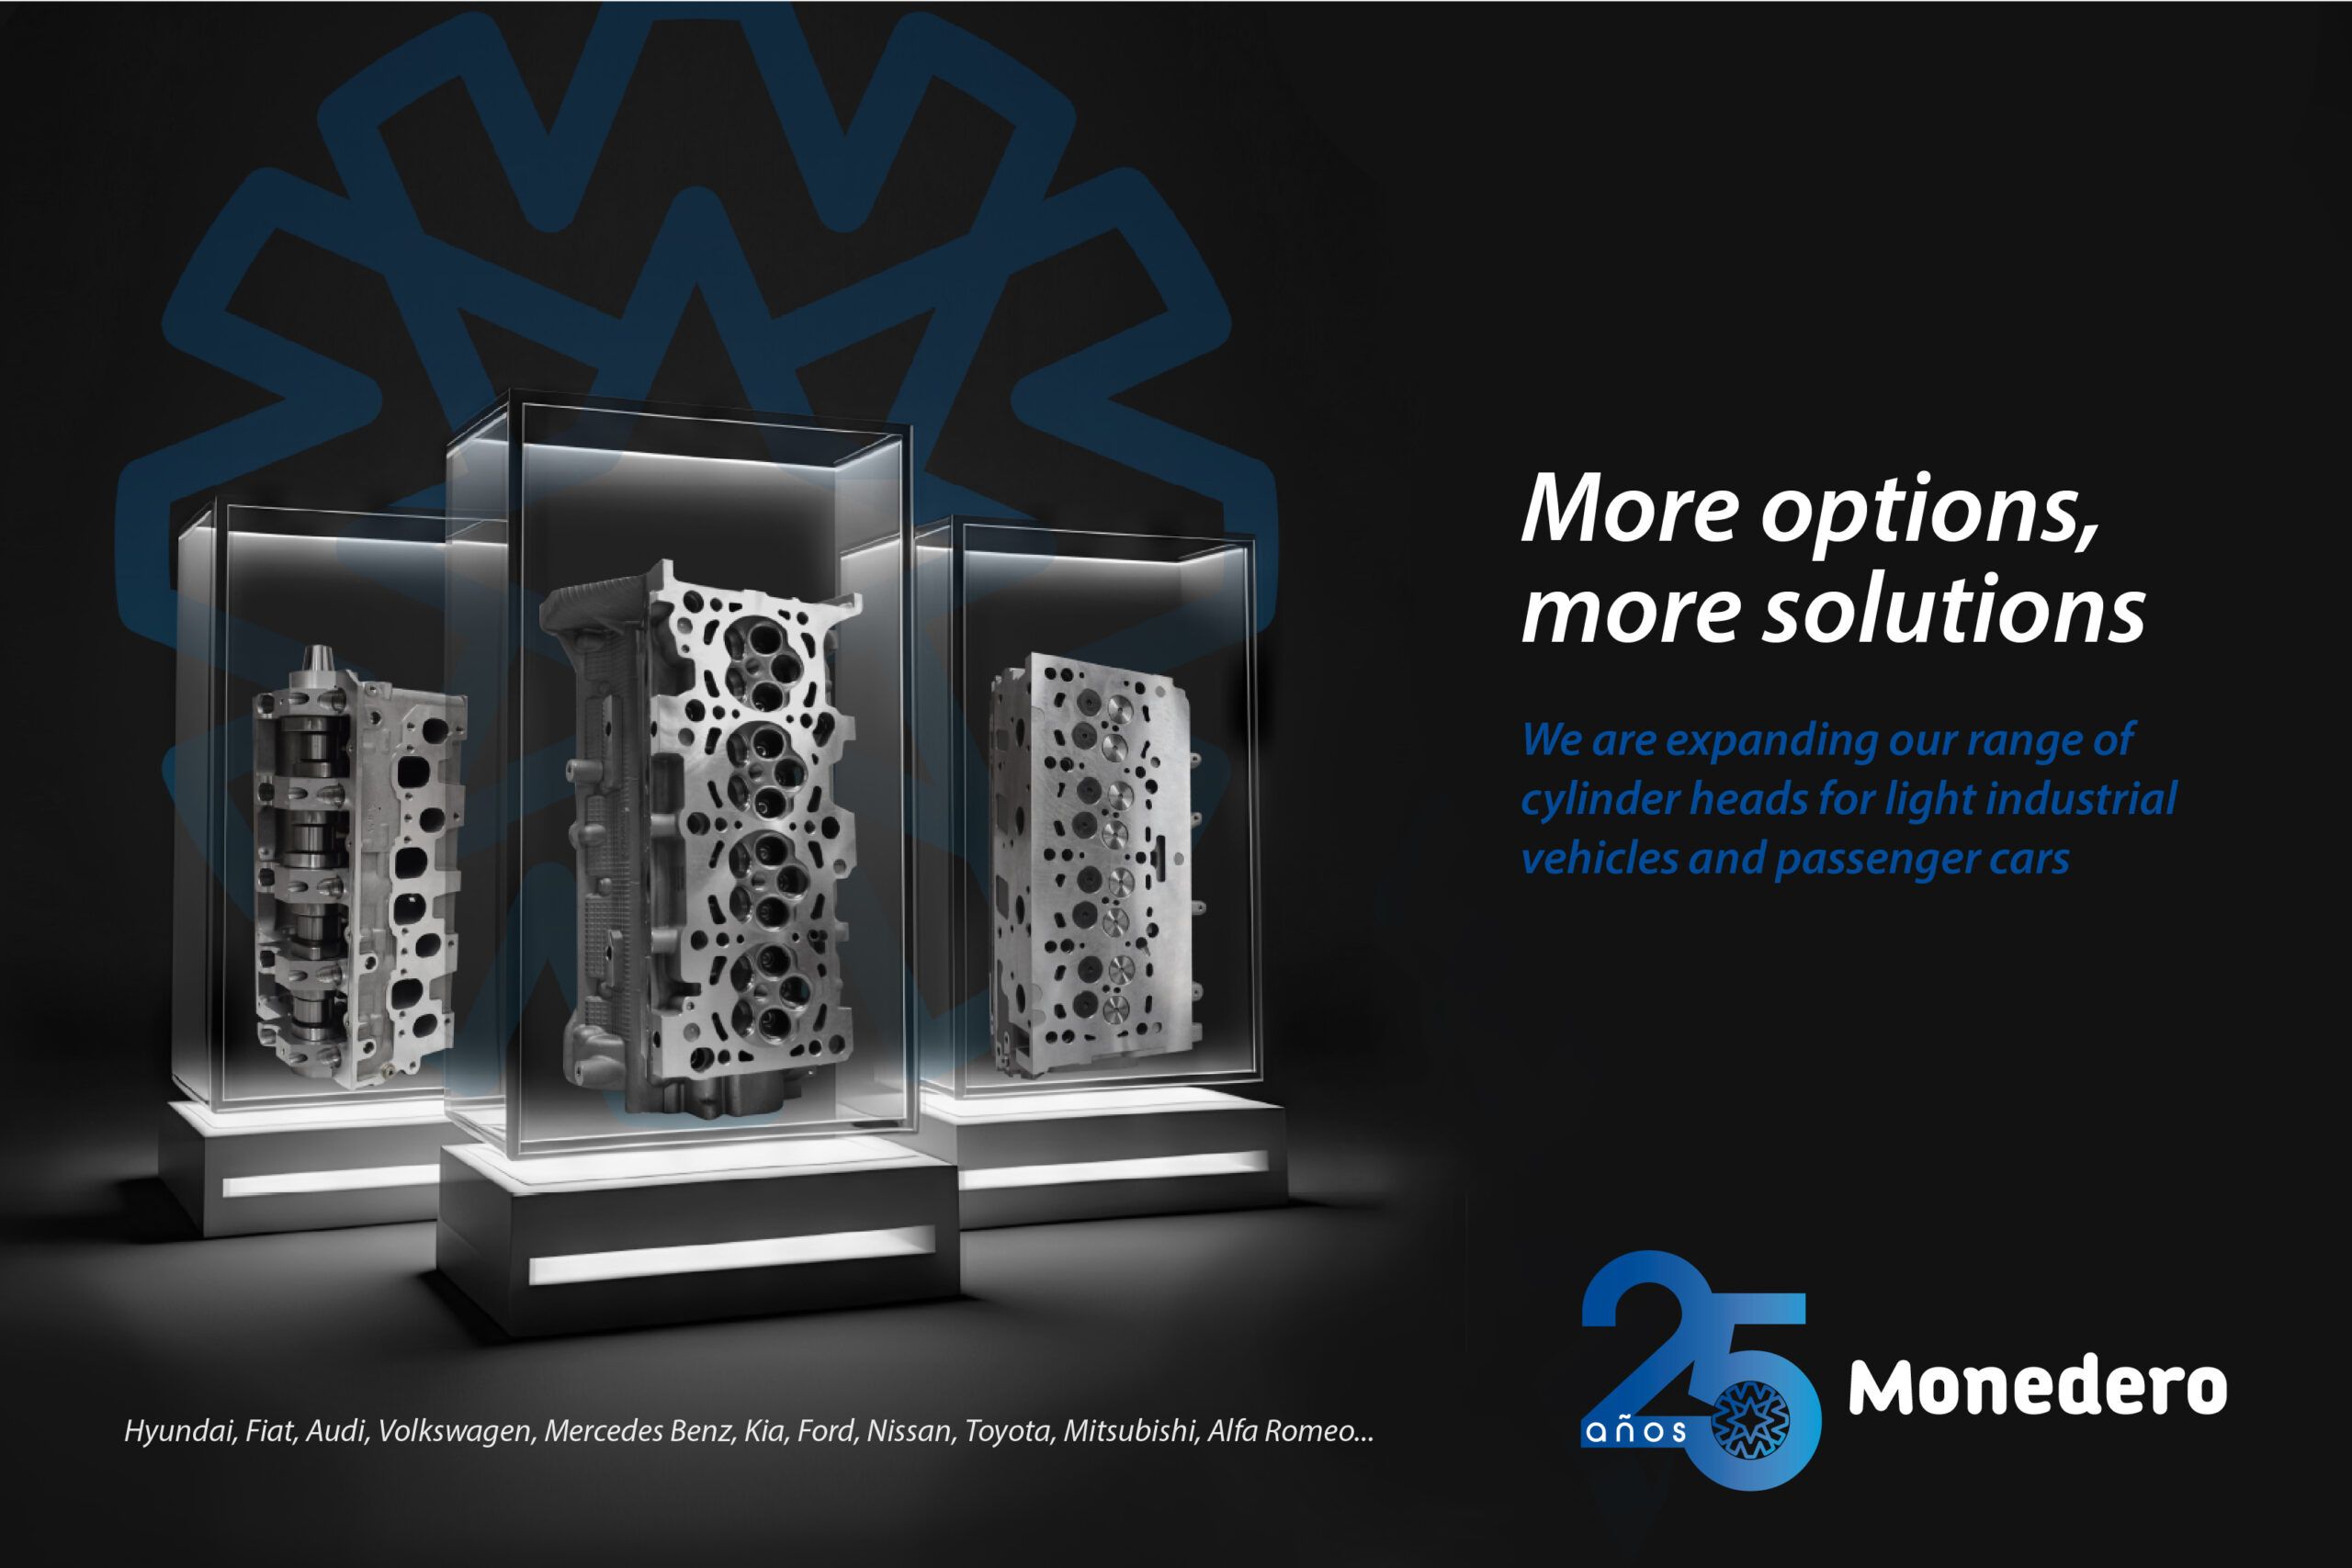 Monedero launches new cylinder heads for LIV and passenger cars.